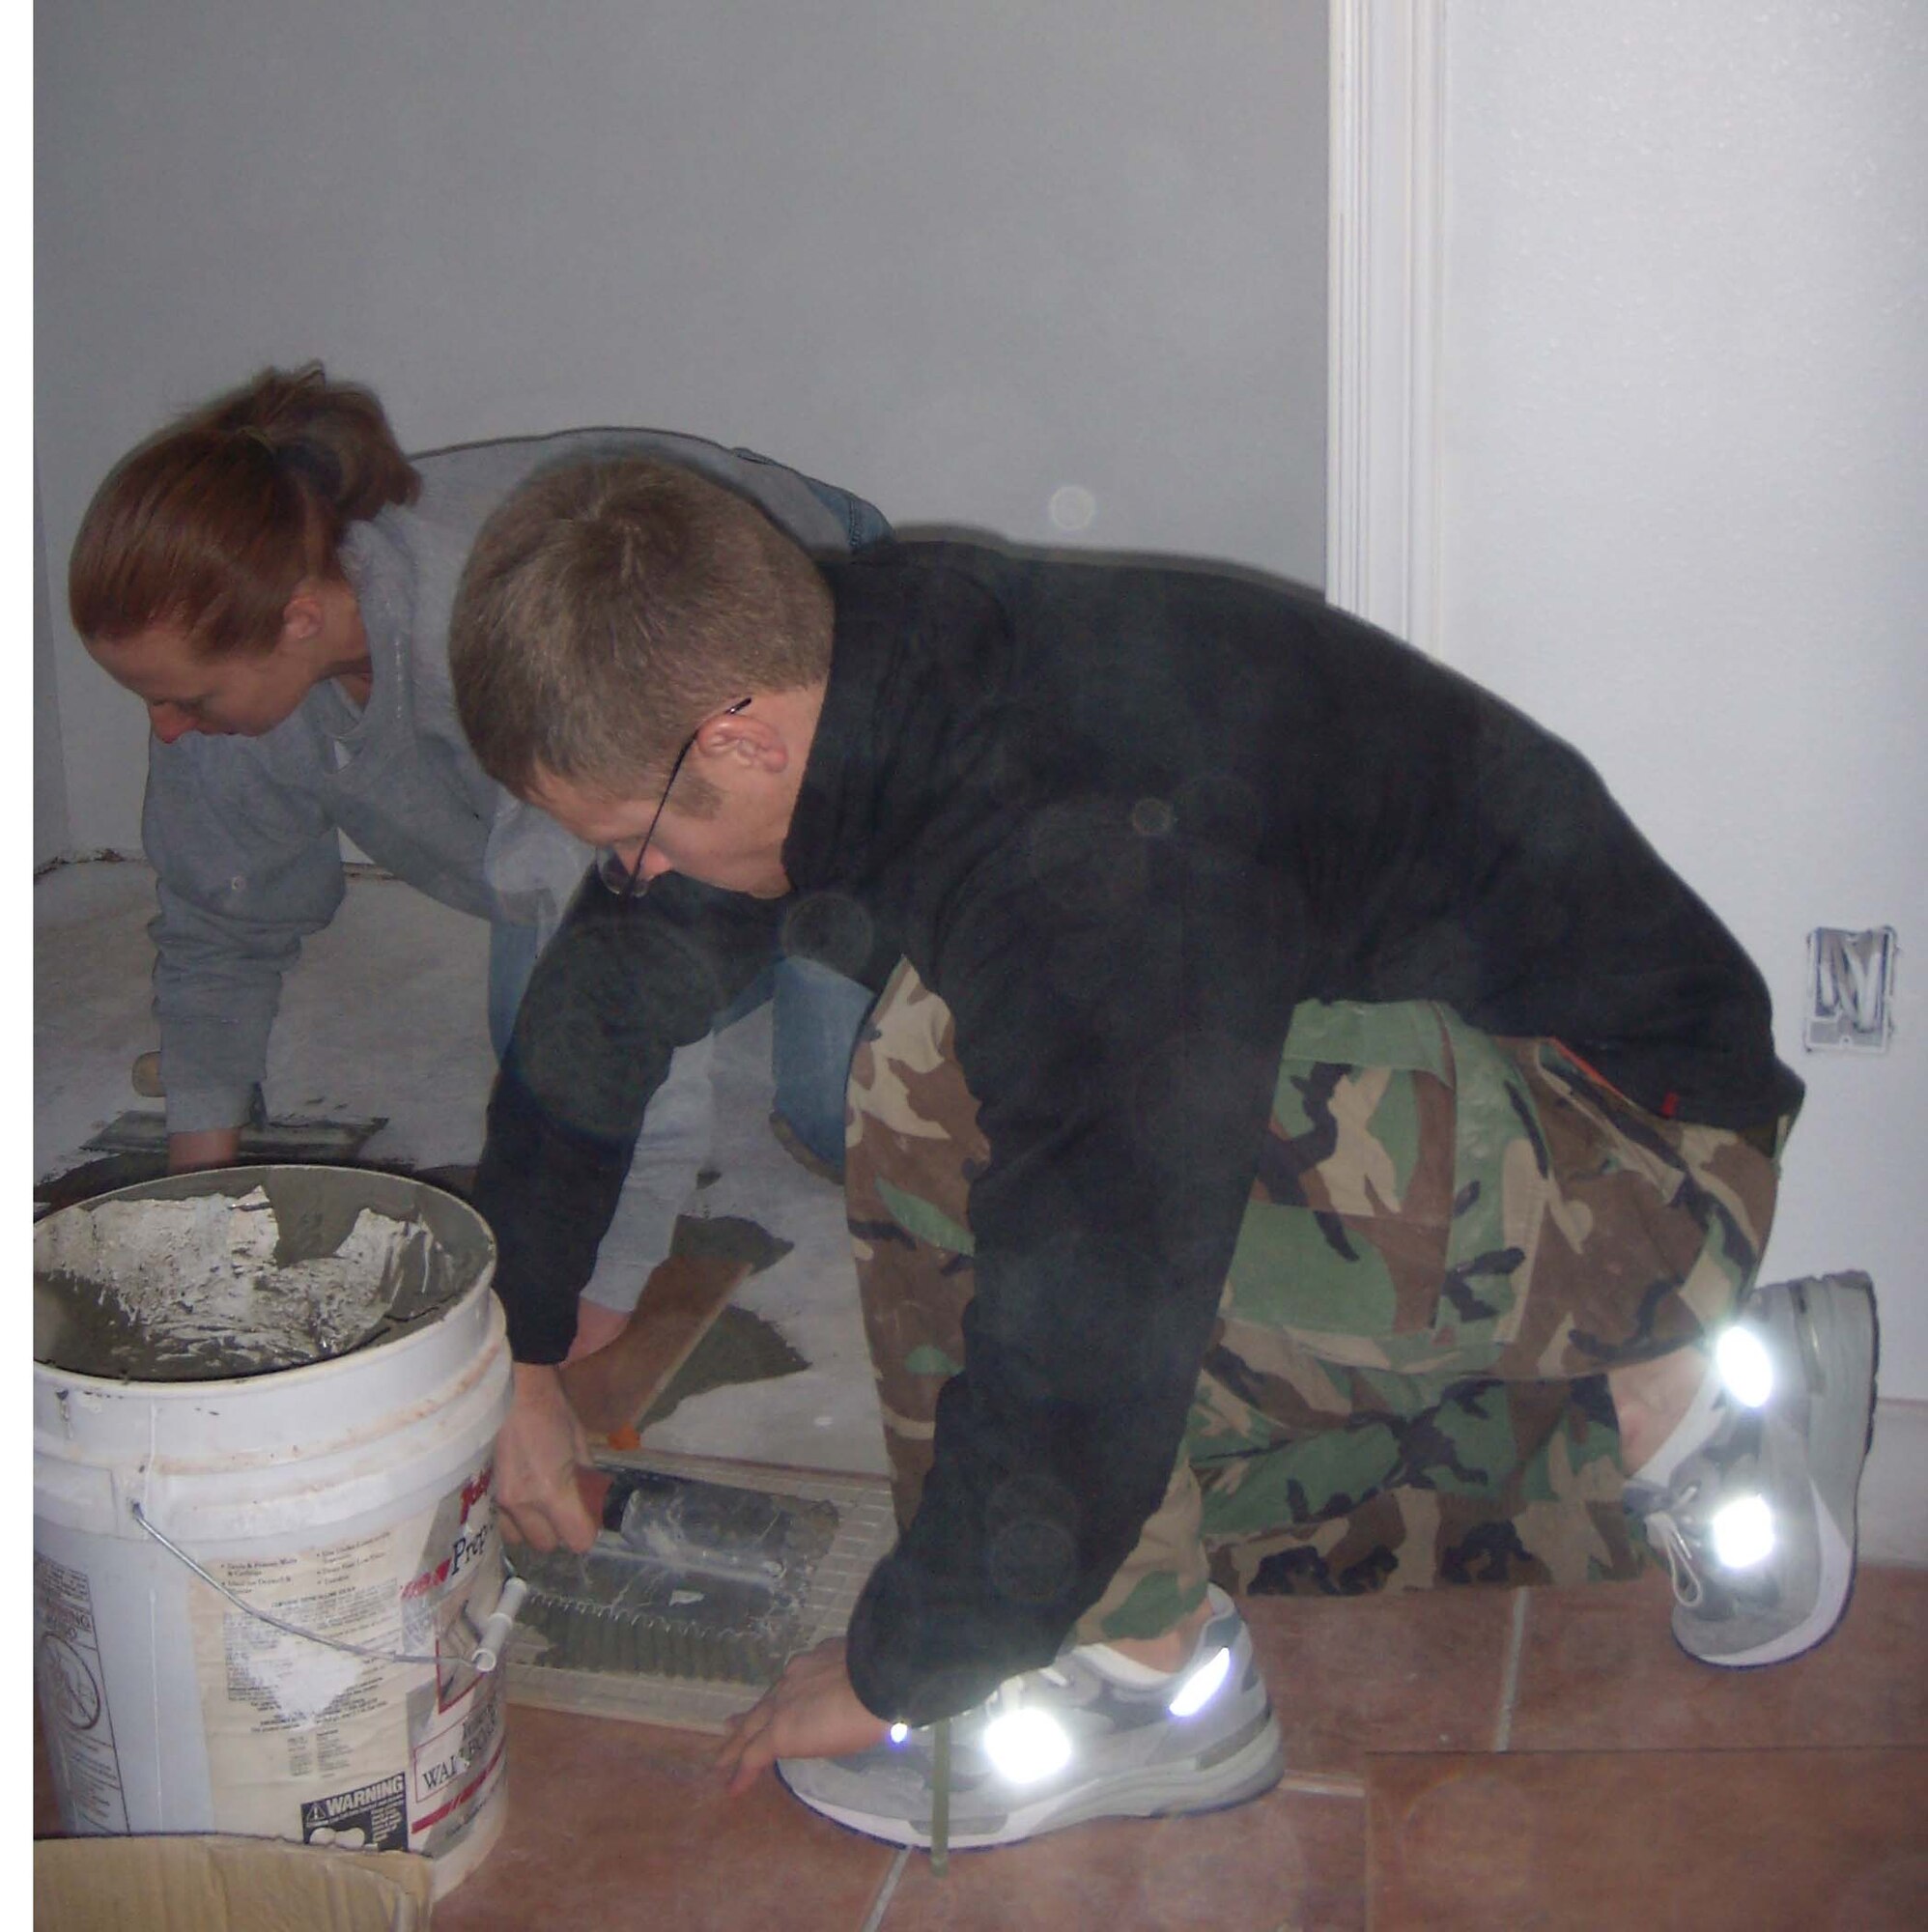 The CGOC began building this home with Habitat for Humanity last summer. Here, lieutenants Kathryn Maitrejean, 49th Logistics Readiness Squadron and Nate DeRohan, 49th Security Forces Squadron, lay tile in a bedroom.  